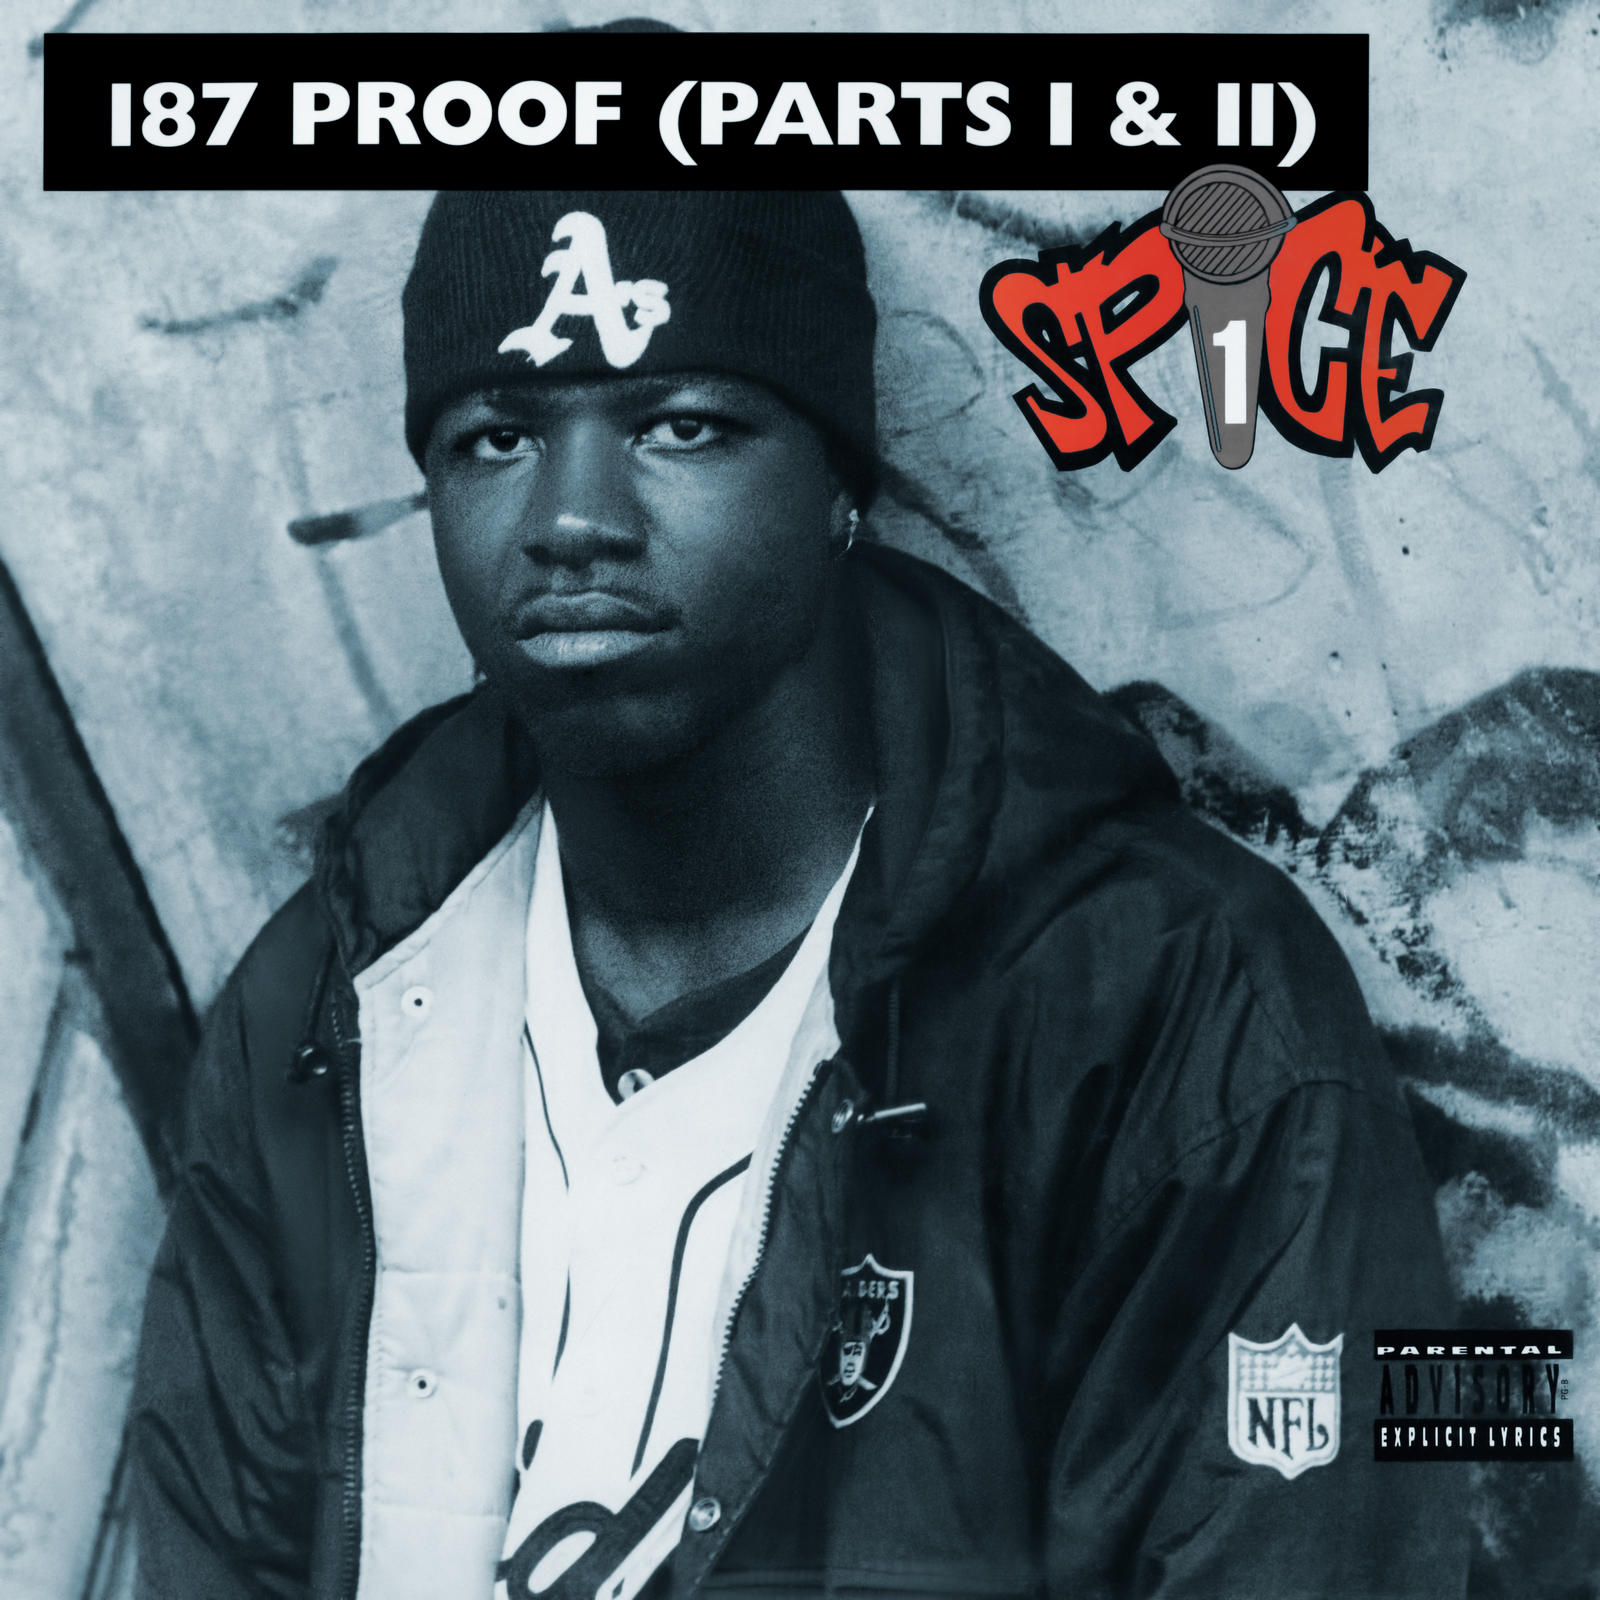 Spice 1 - 187 Proof (Part 2)